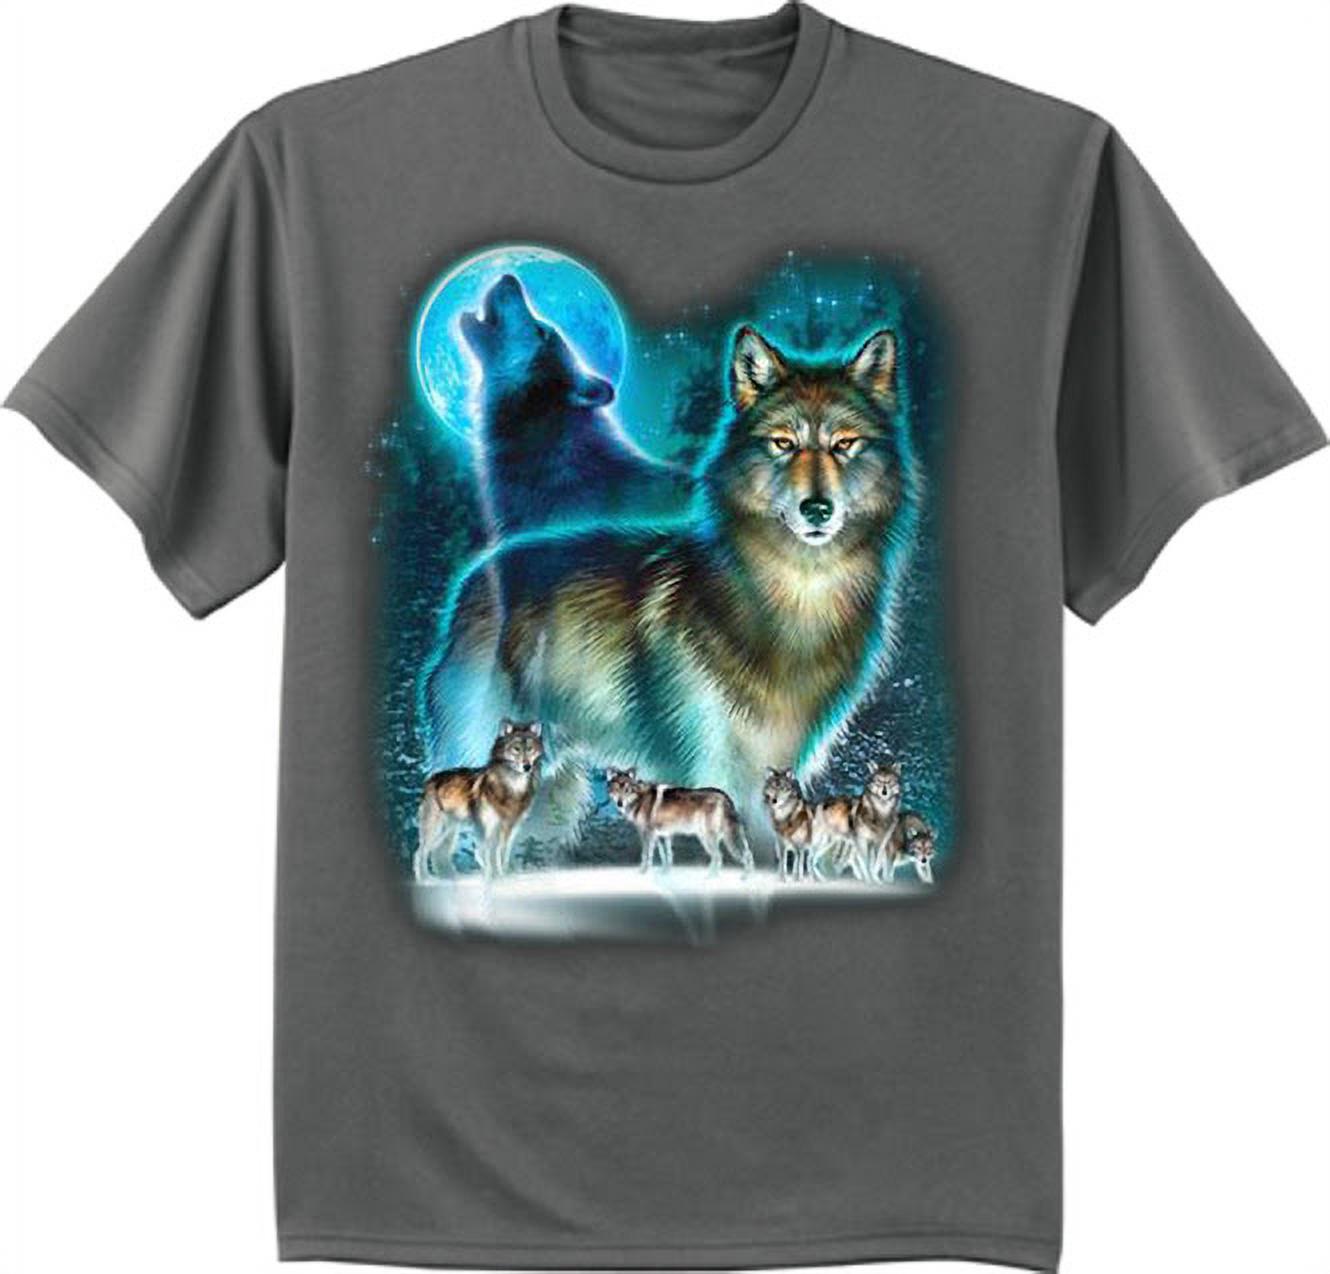 Pack of wolves lone wolf moon t-shirt graphic tee for men - image 1 of 1